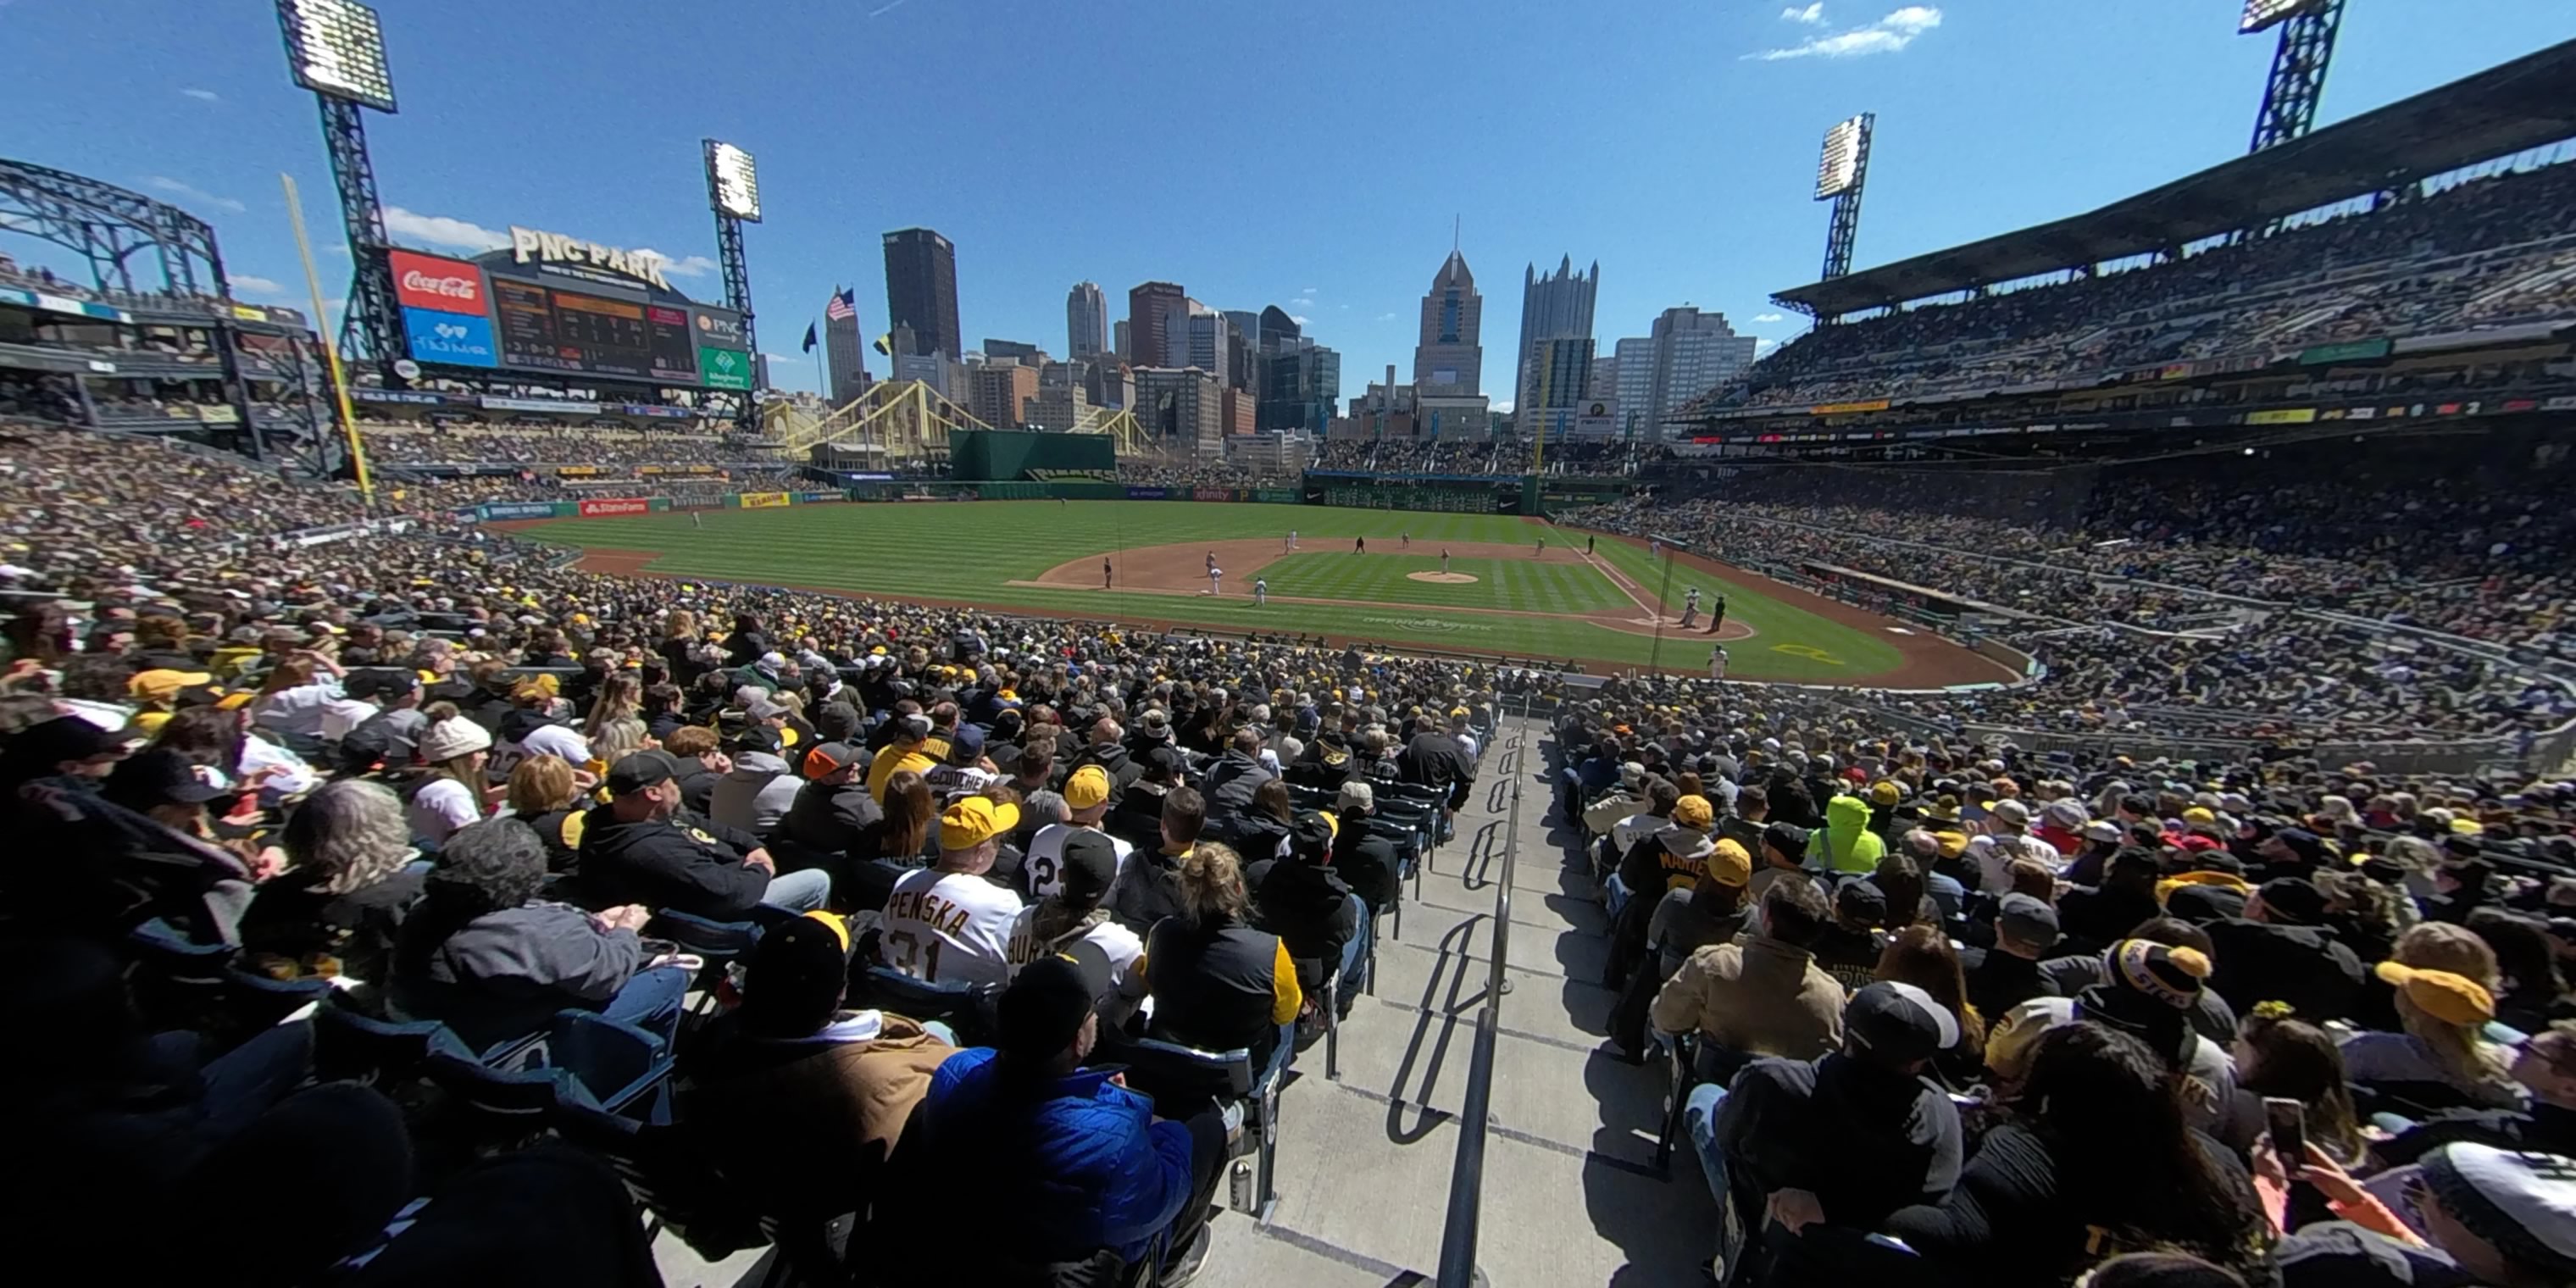 section 120 panoramic seat view  - pnc park